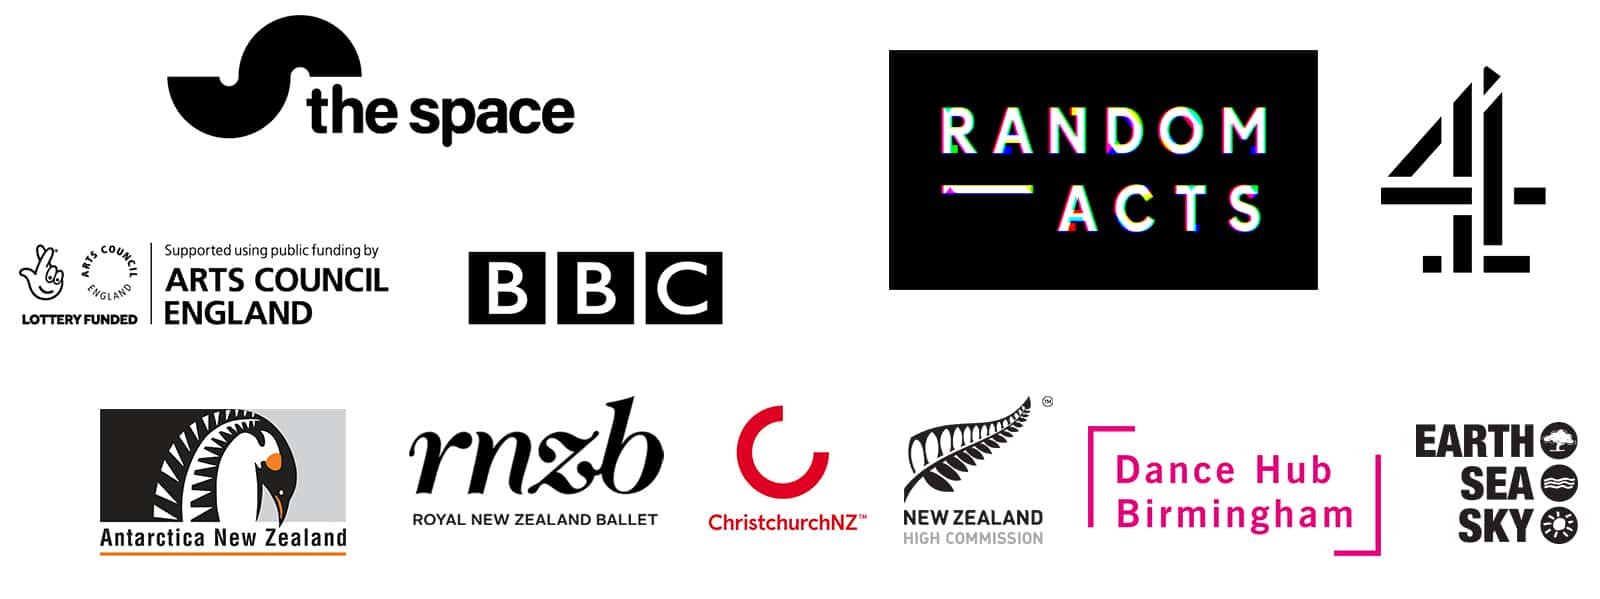 Sponsor logos; The Space, BBC, Arts Council England, Randon Acts, Channel 4, Royal New Zealand Ballet, New Zealand Hight Commission, DanceXchange, ChristchurchNZ, Earth Sea Sky & Antarctica New Zealand